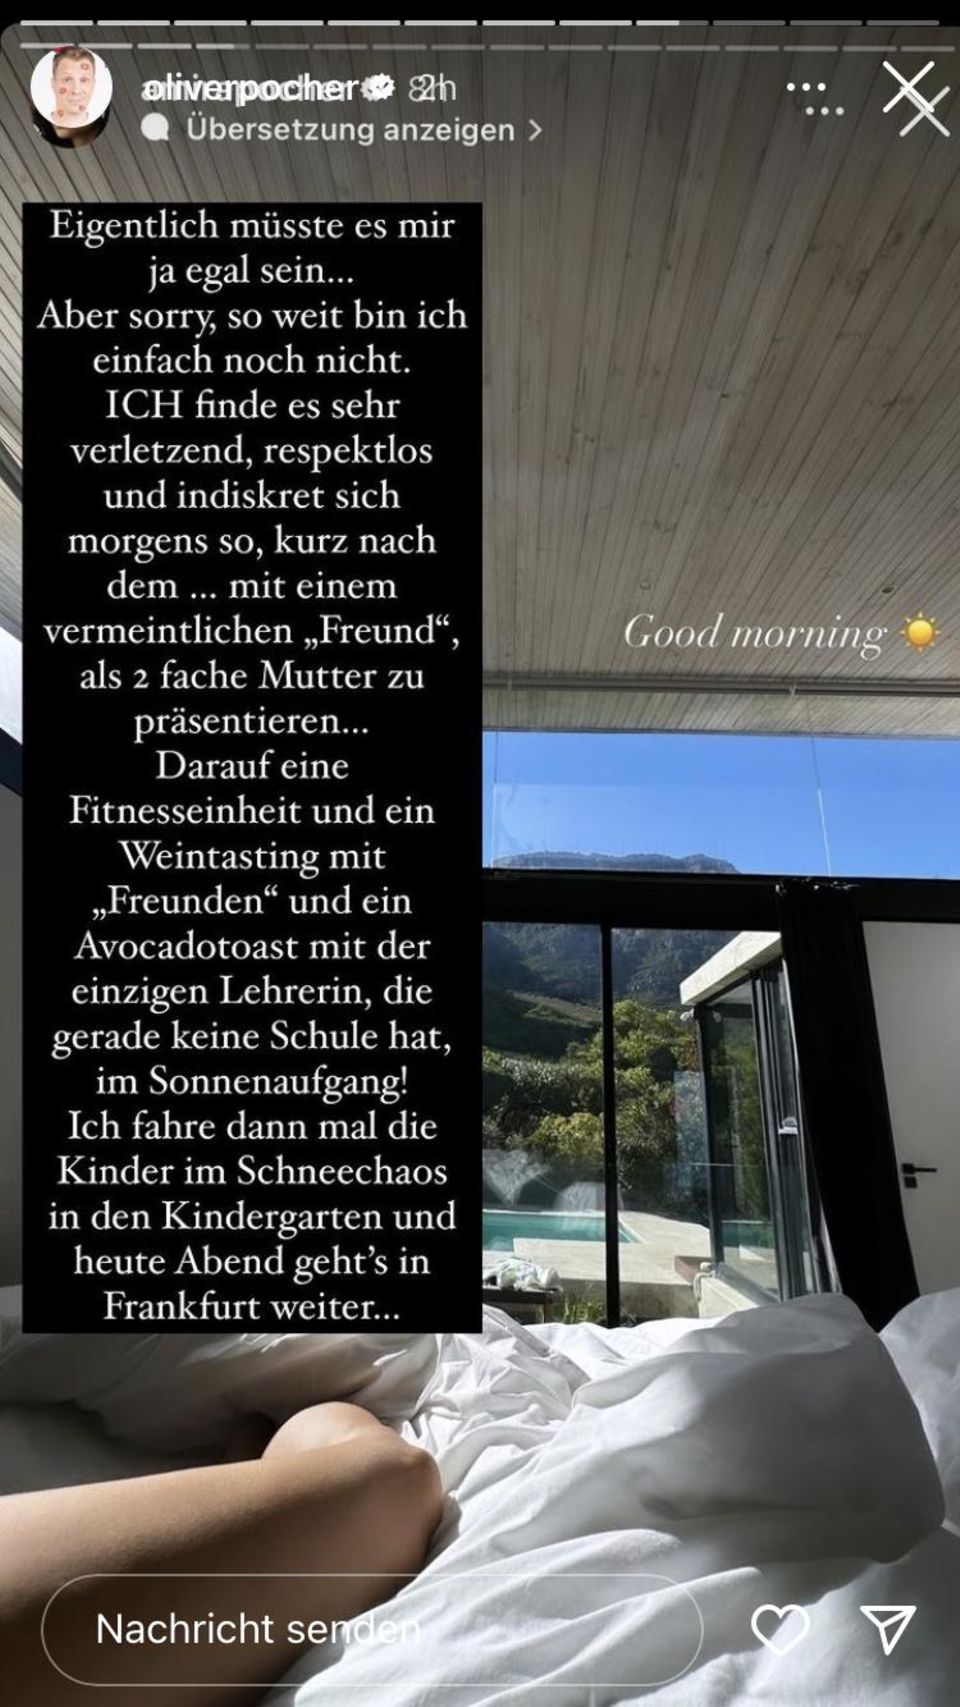 Oliver Pocher lets off steam in his Instagram story.